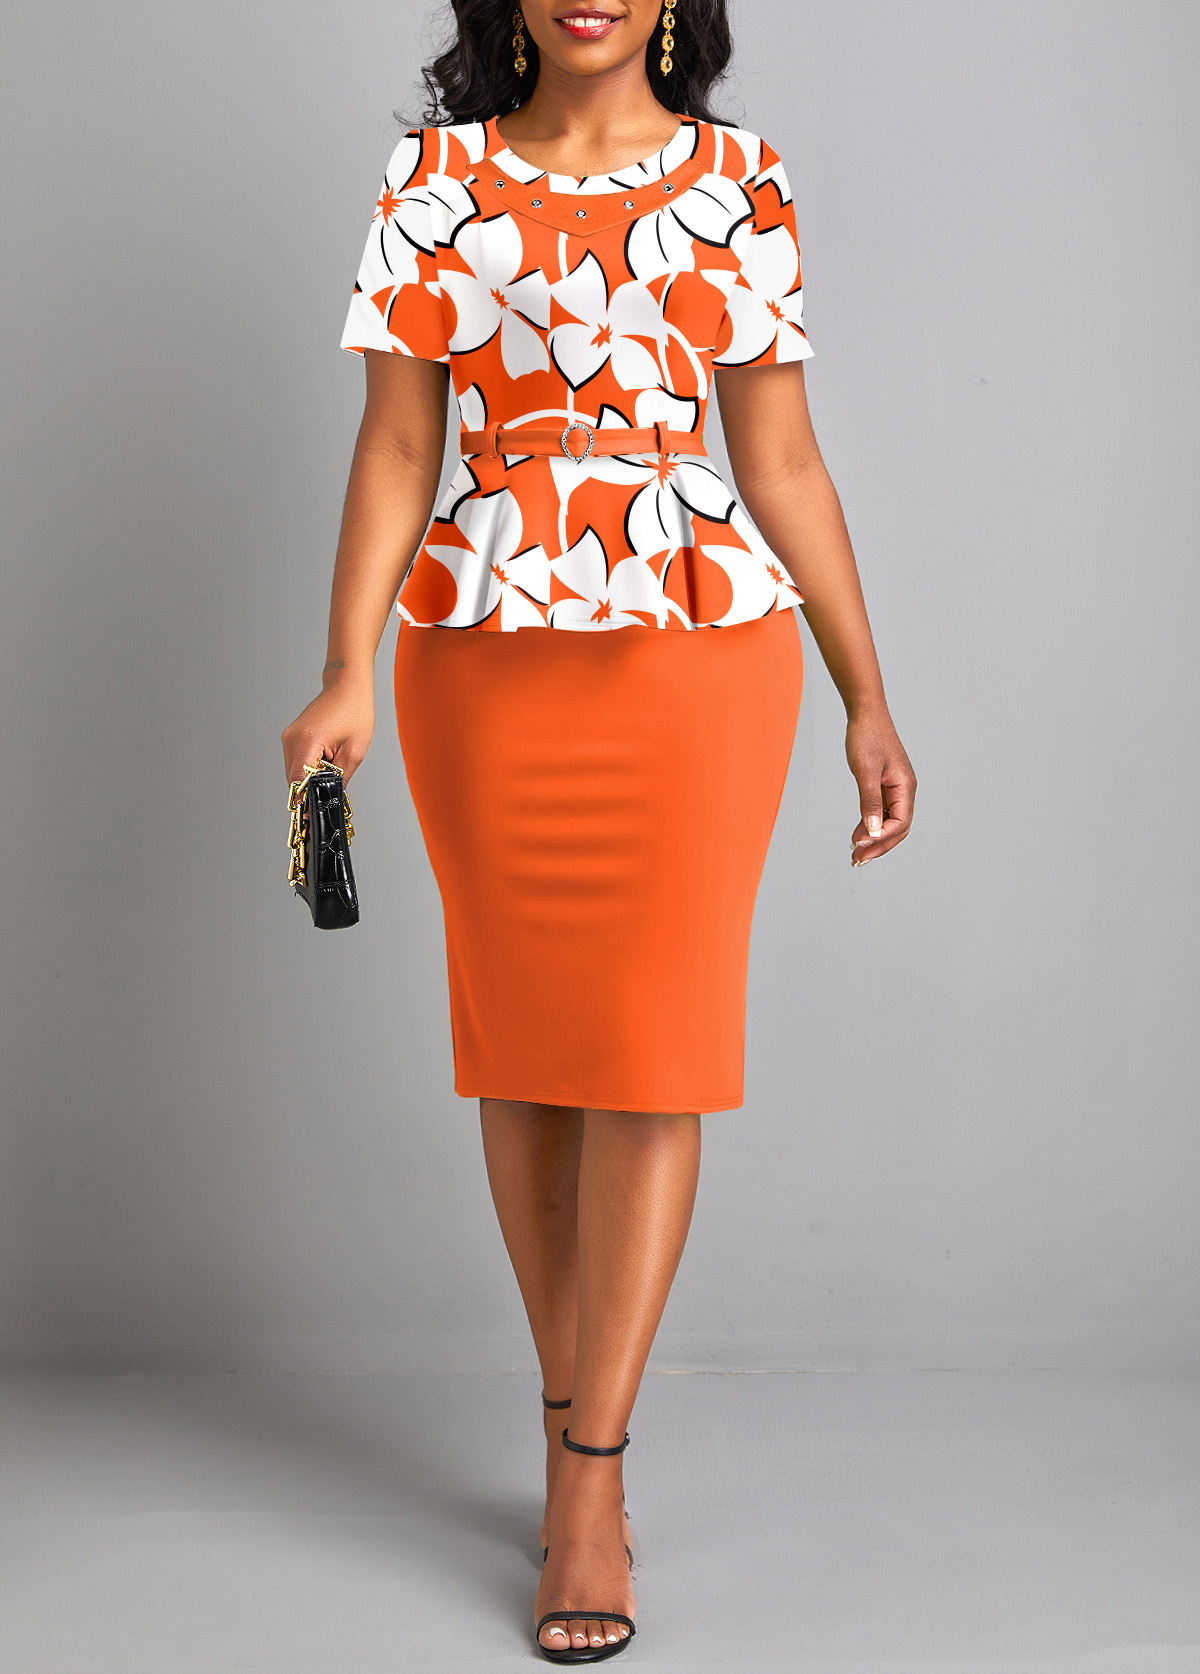 Floral Print Fake 2in1 Belted Orange Bodycon Dress